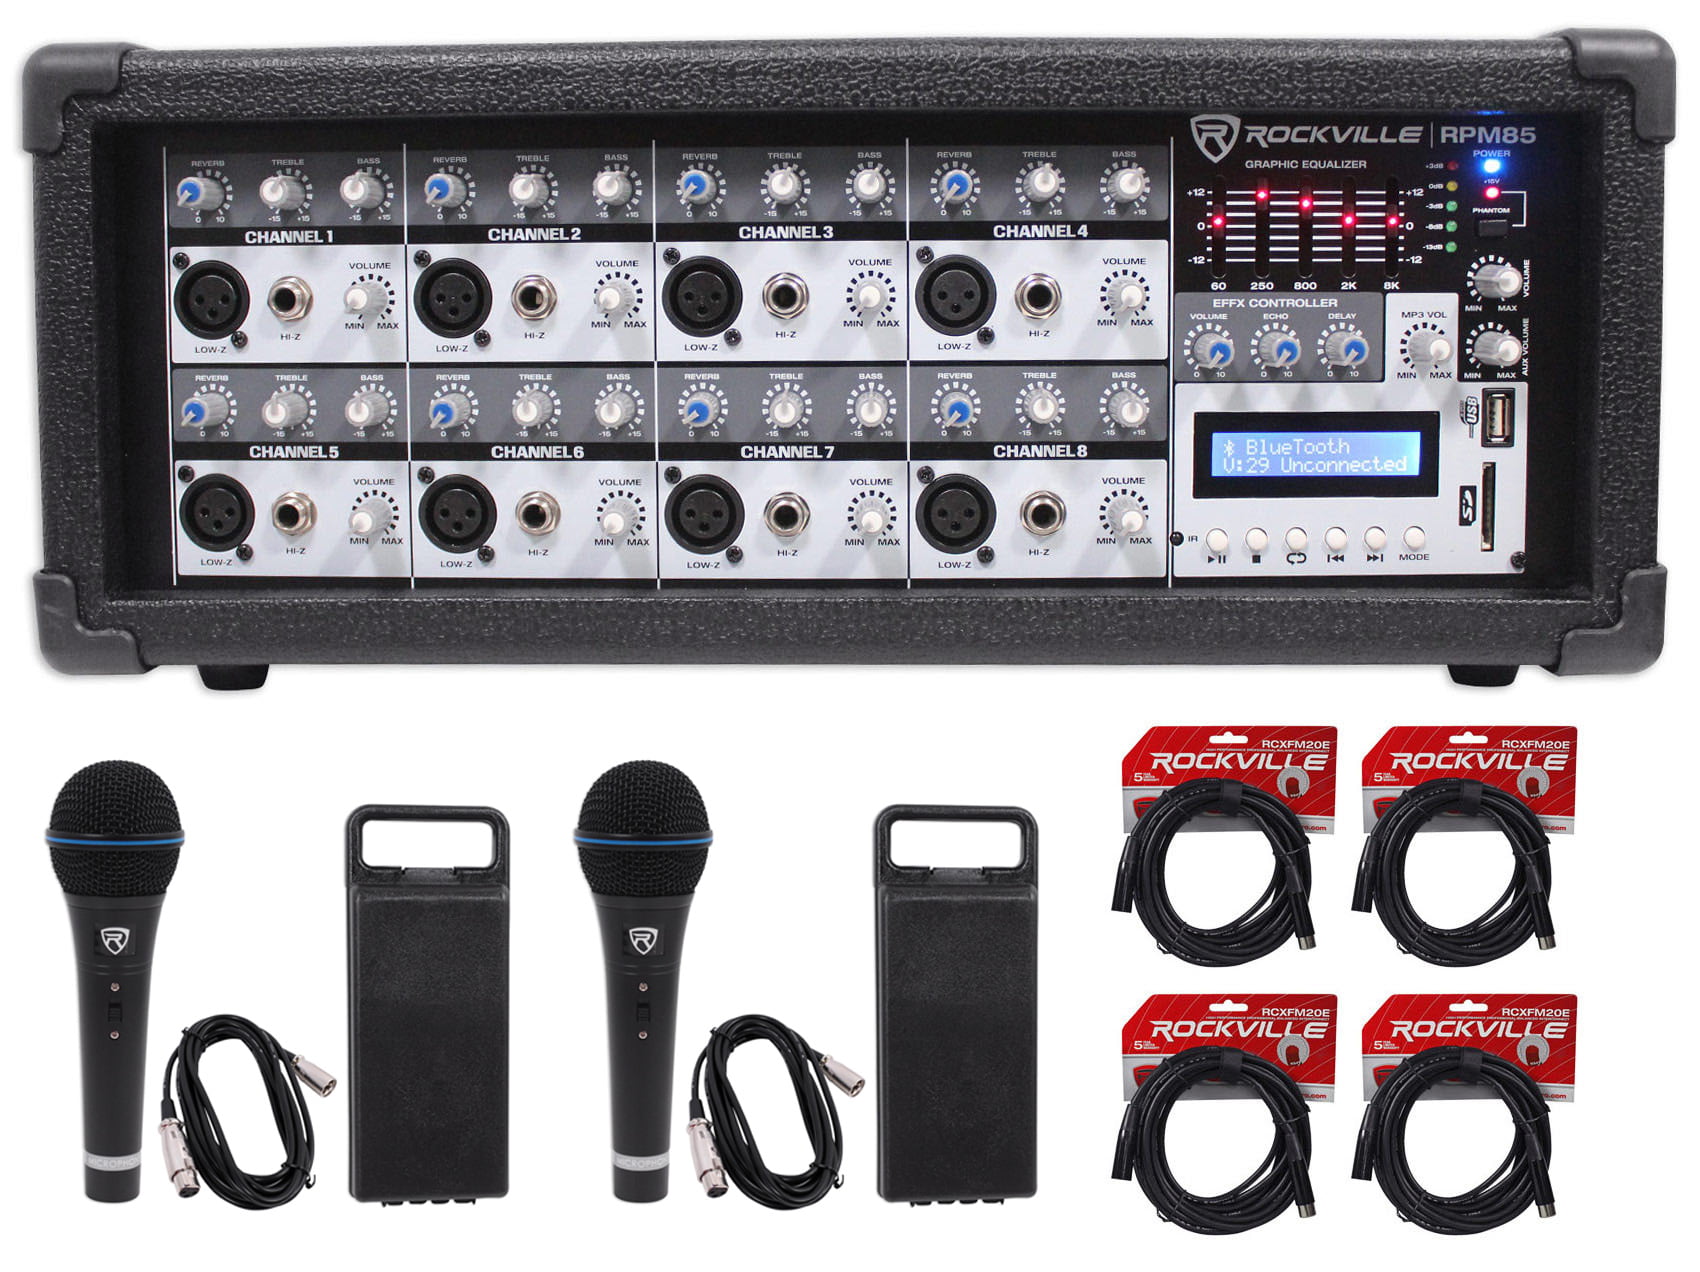 Rockville RPM45 2400w Powered 4 Channel Mixer/Amplifier with USB/EQ/Effects/Phantom